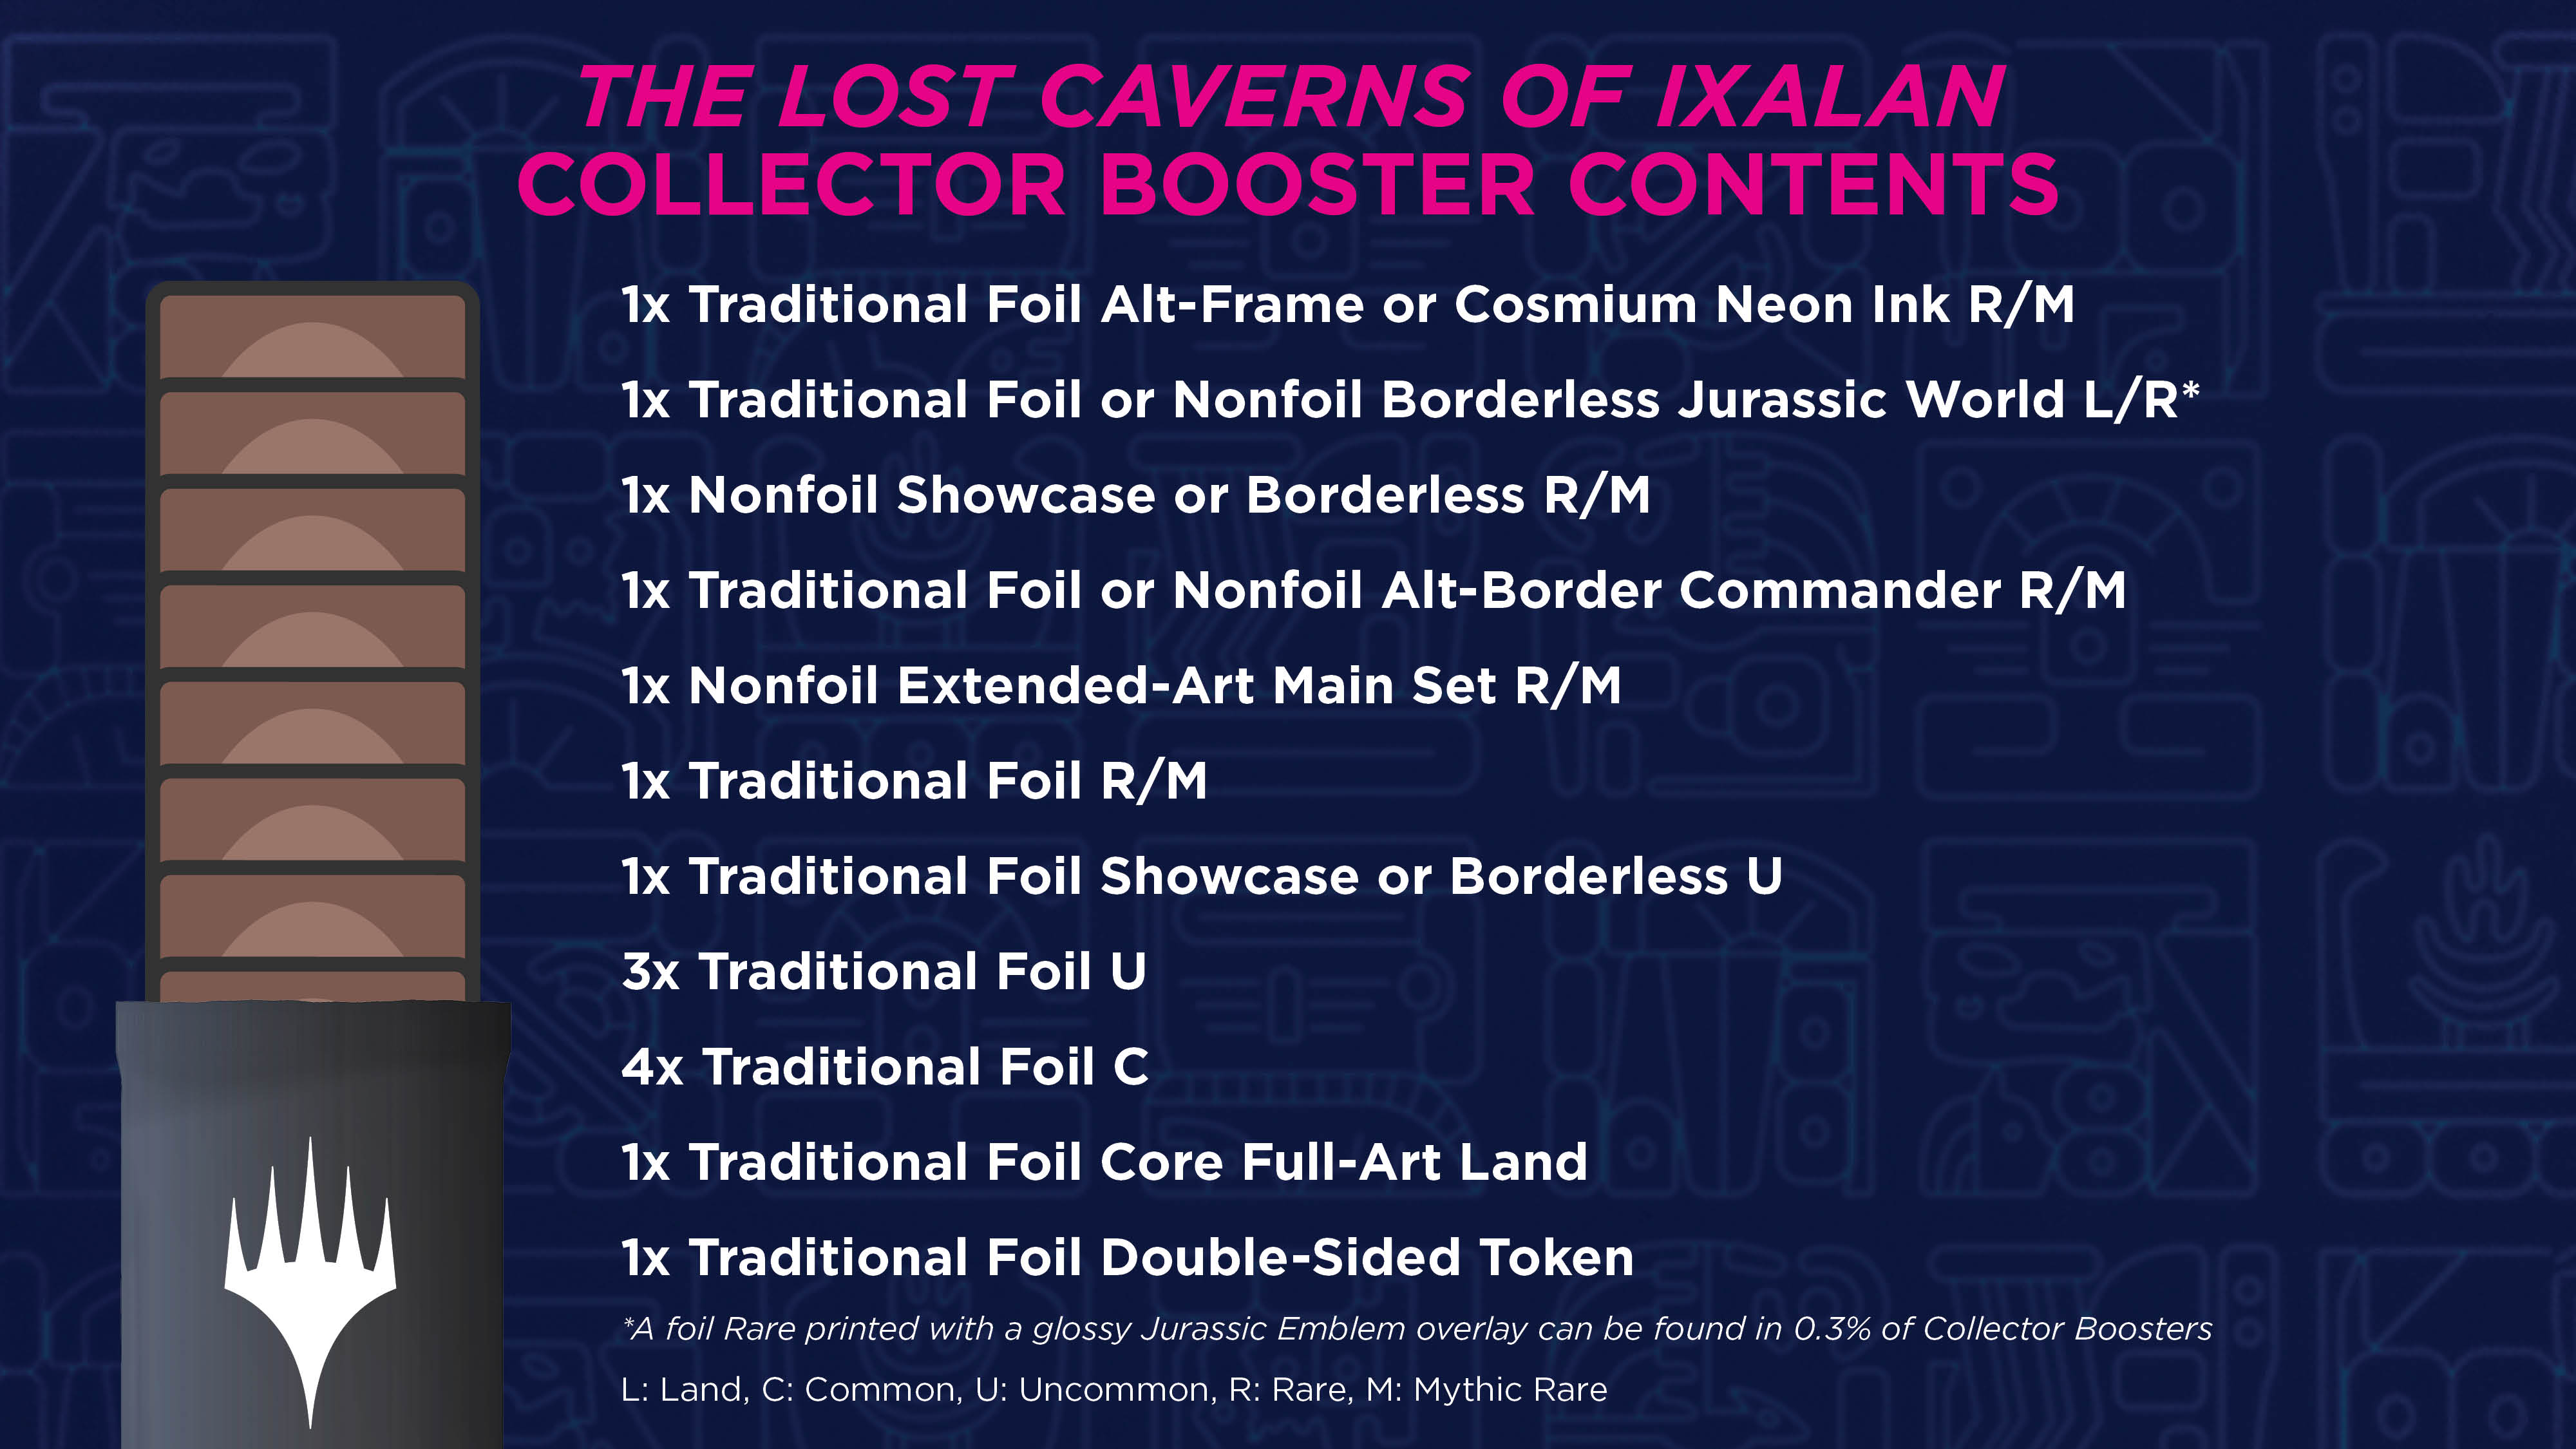 Collecting The Lost Caverns of Ixalan